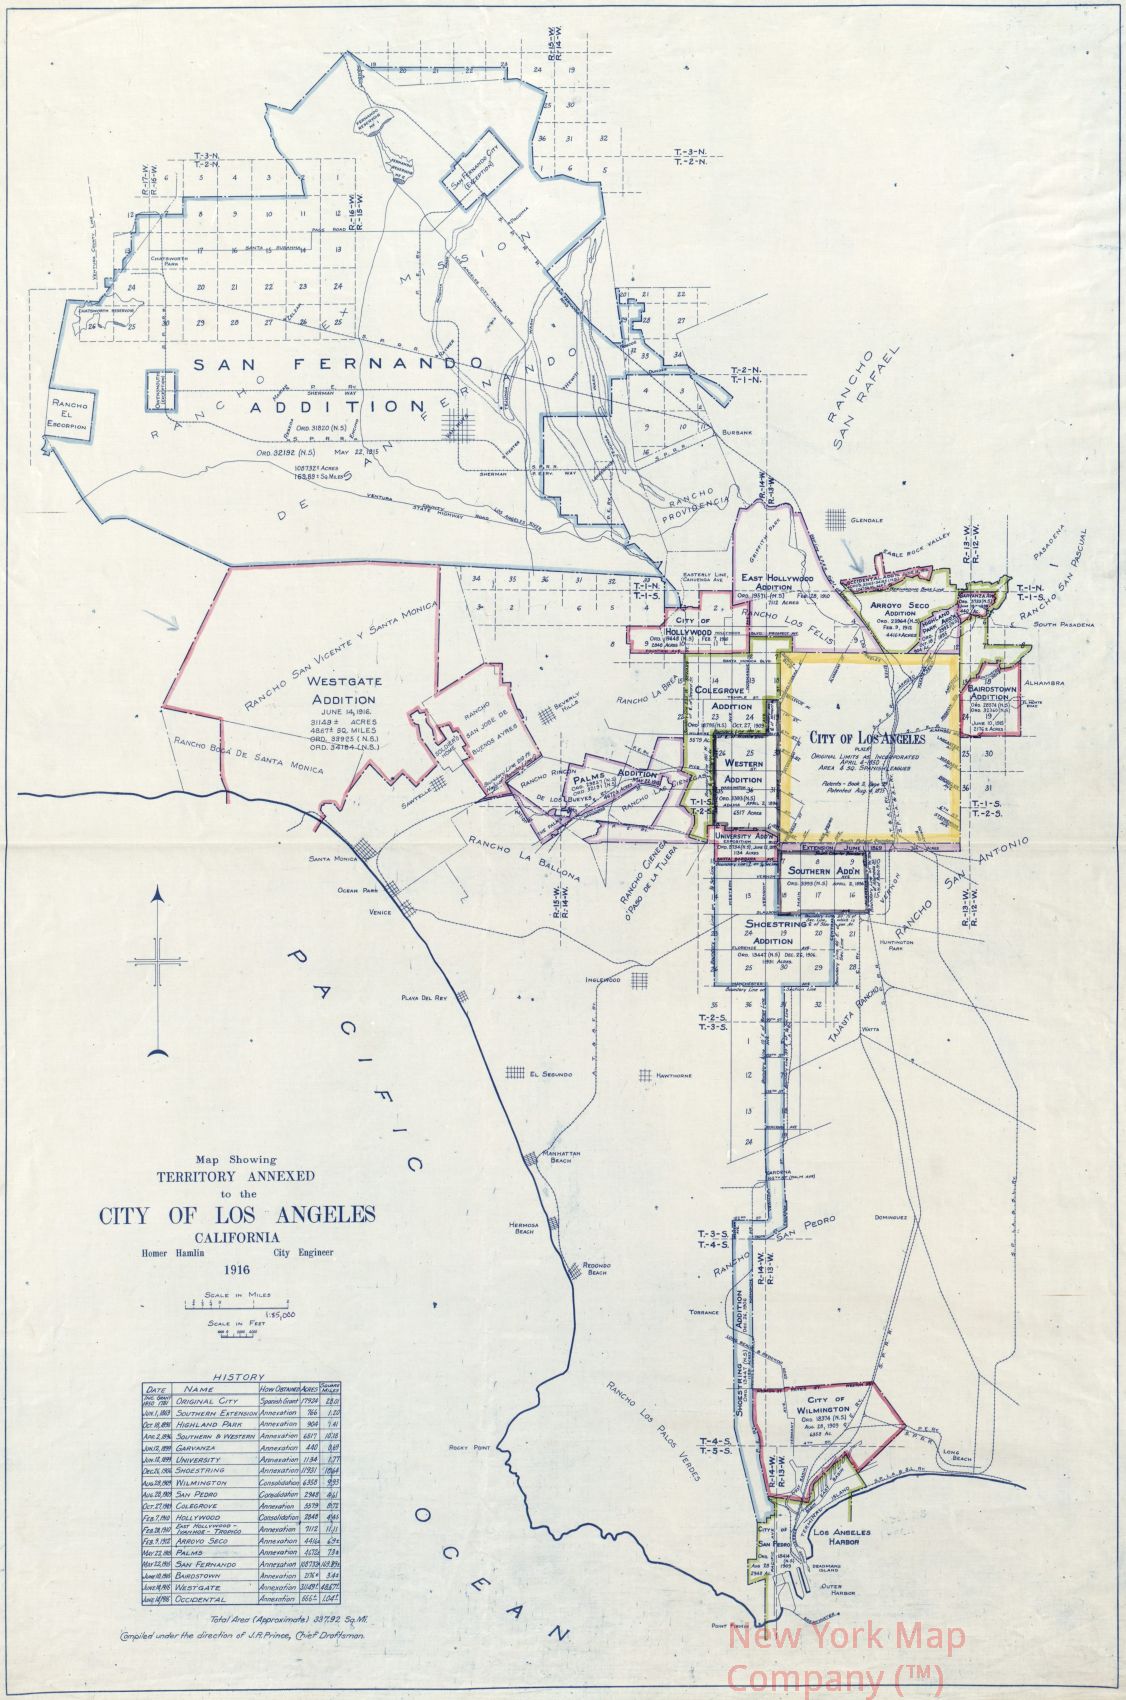 1916 map showing territory annexed to the city of Los Angeles, California. Map Subjects: Annexation Municipal Government | California | Los Angeles | Los Angeles |